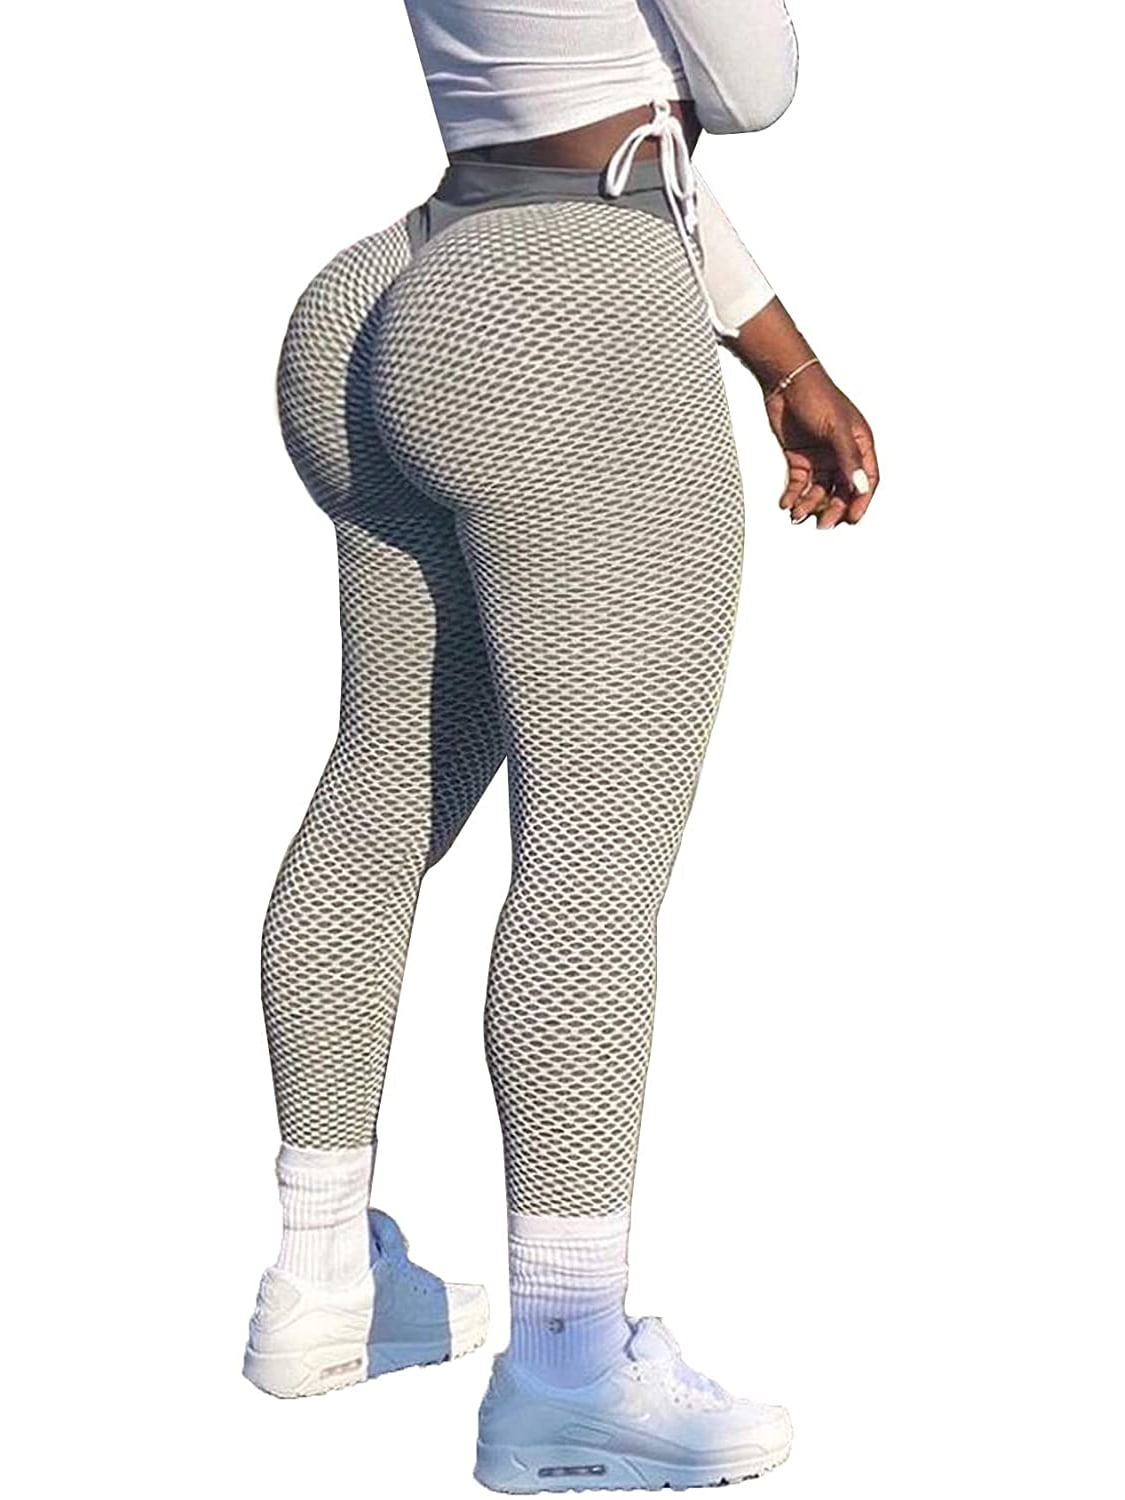 Yoga Pants for Women Plus Size High Waisted Tummy Control Slimming Booty Leggings Workout Running Butt Lift Tights